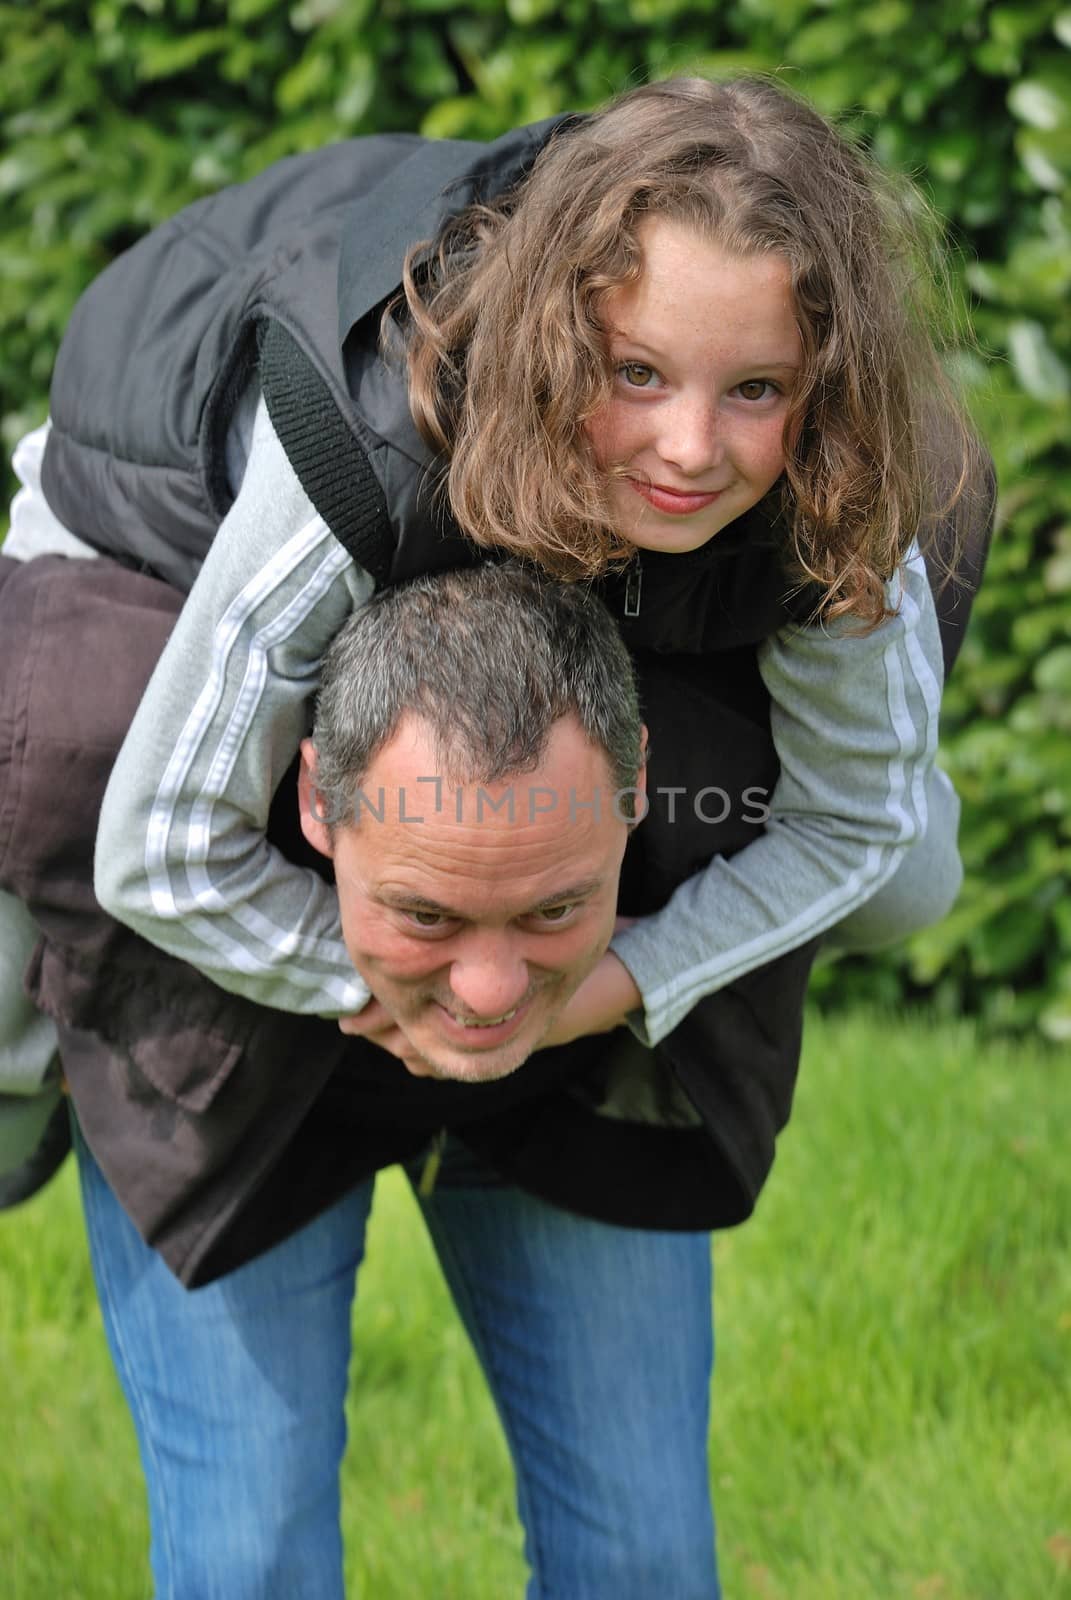 Complicity between father and daughter